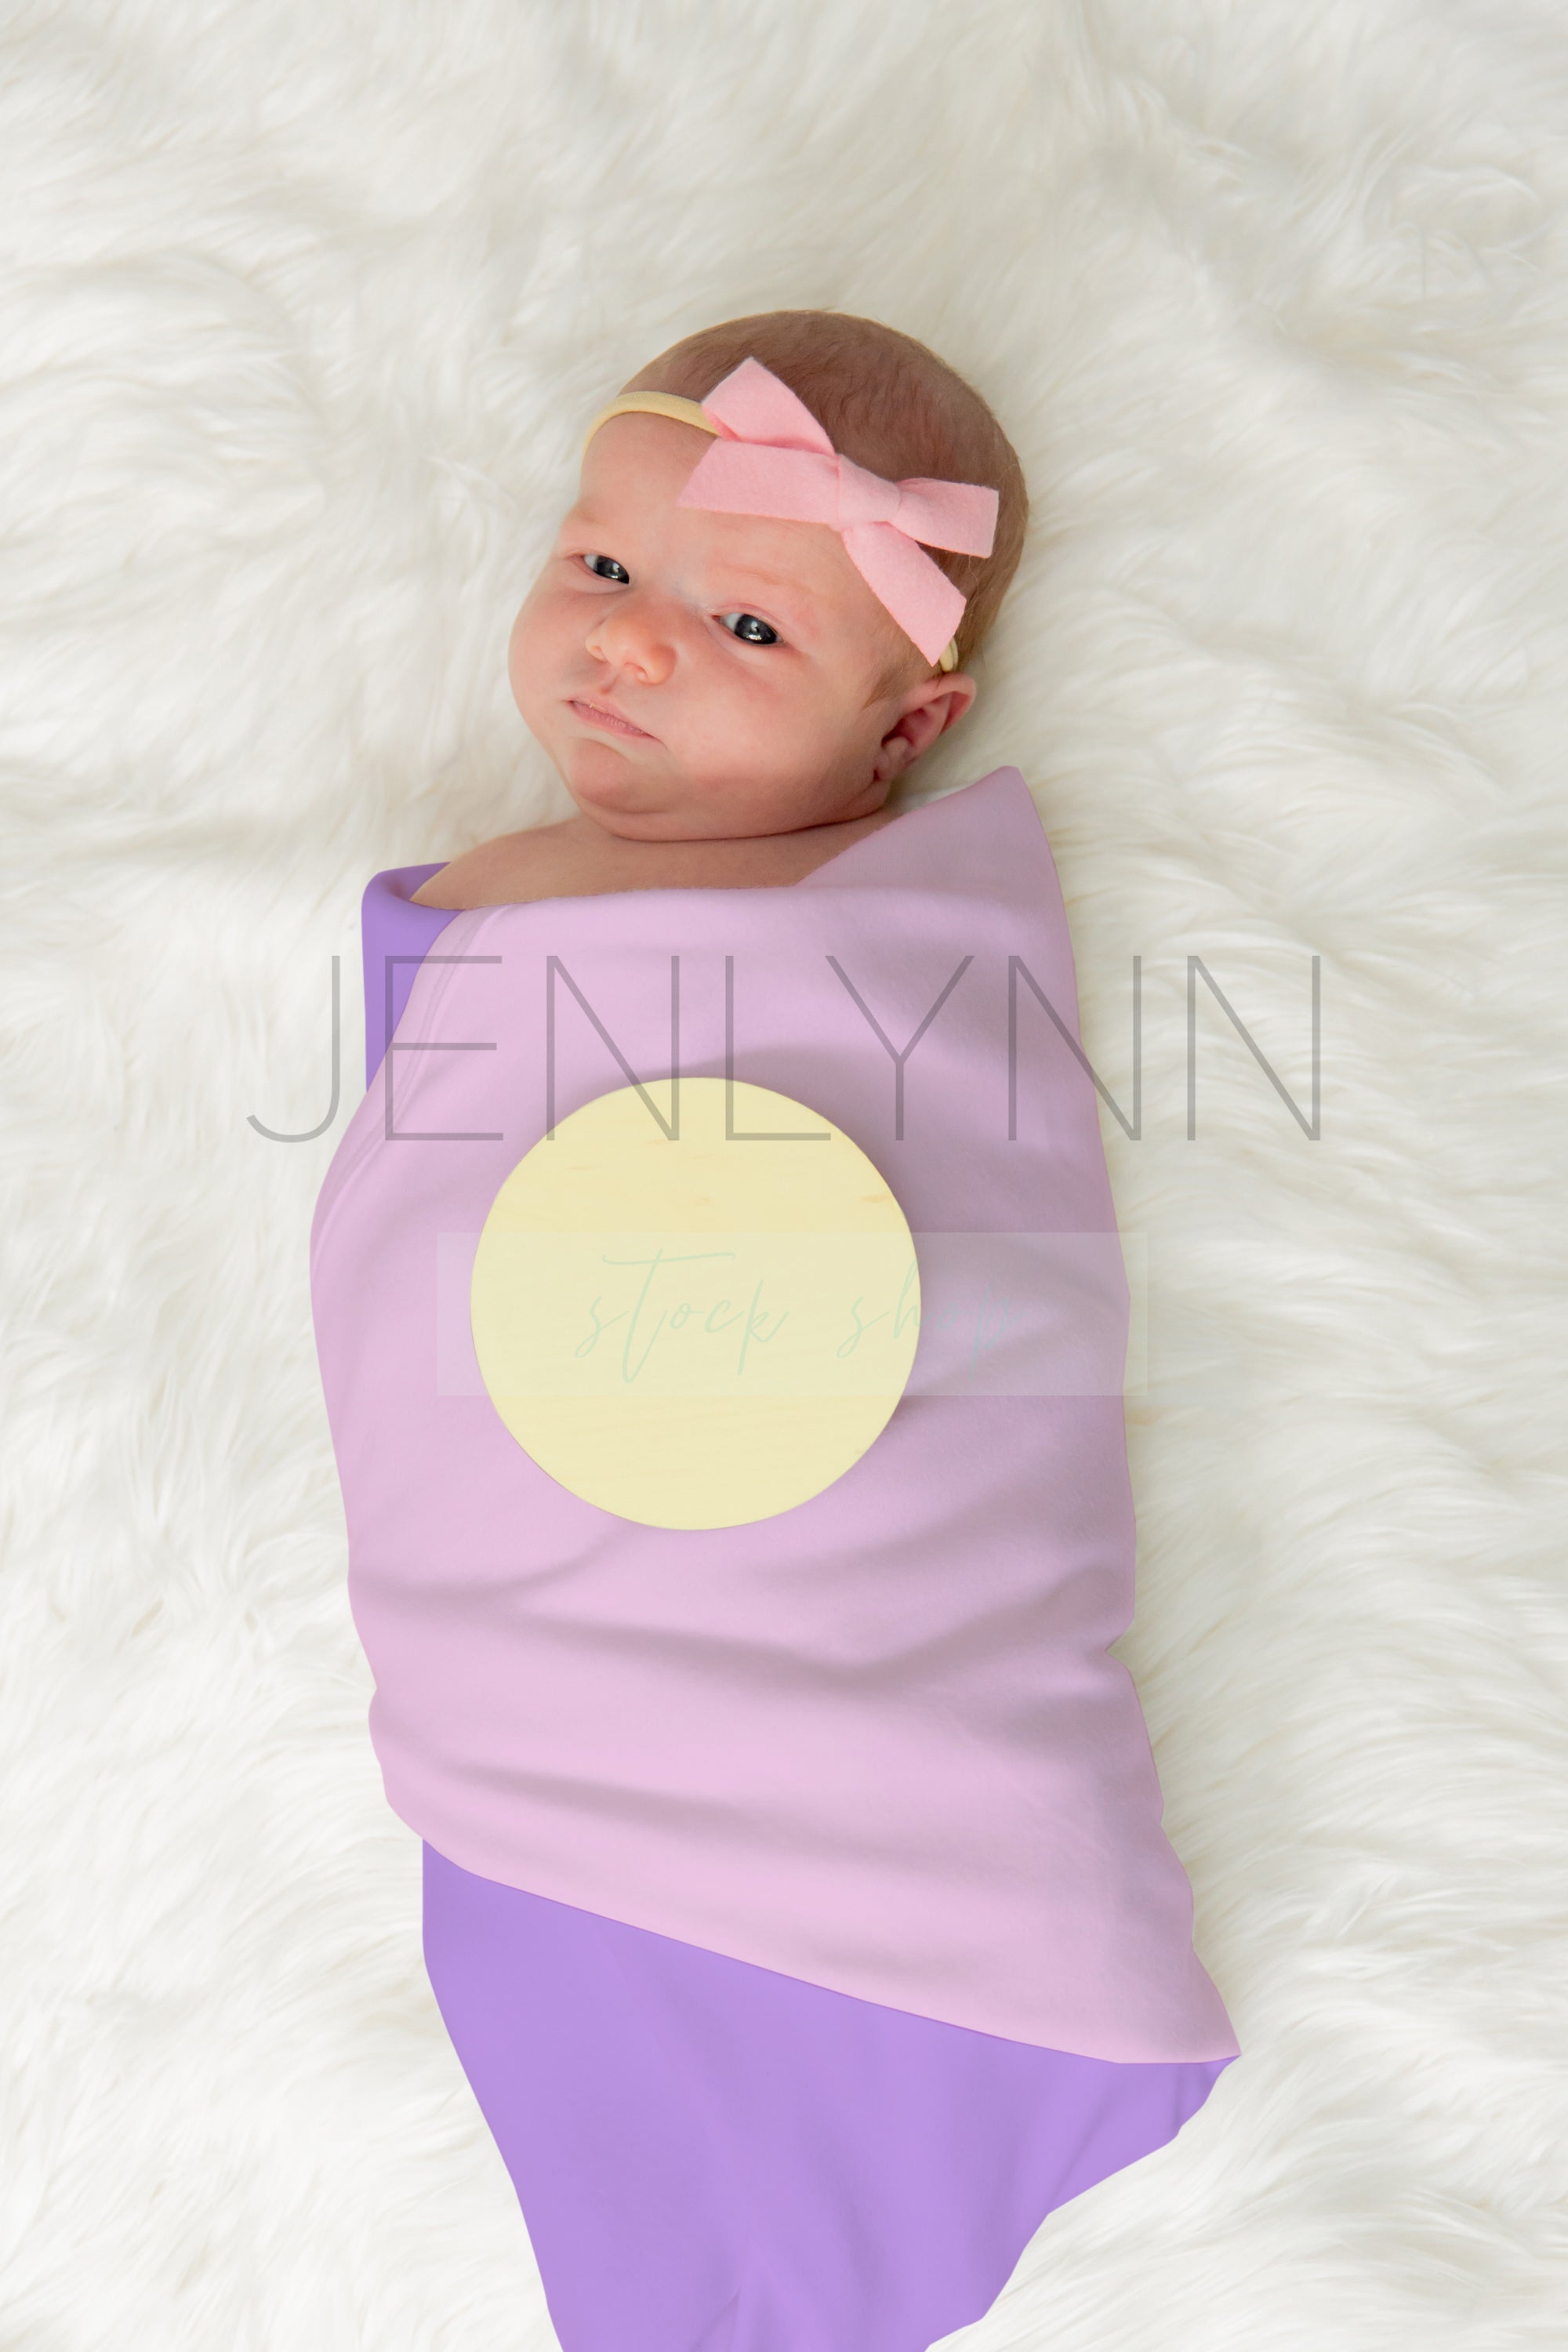 Jersey Baby Blanket Mockup with Wooden Stats sign #3 PSD